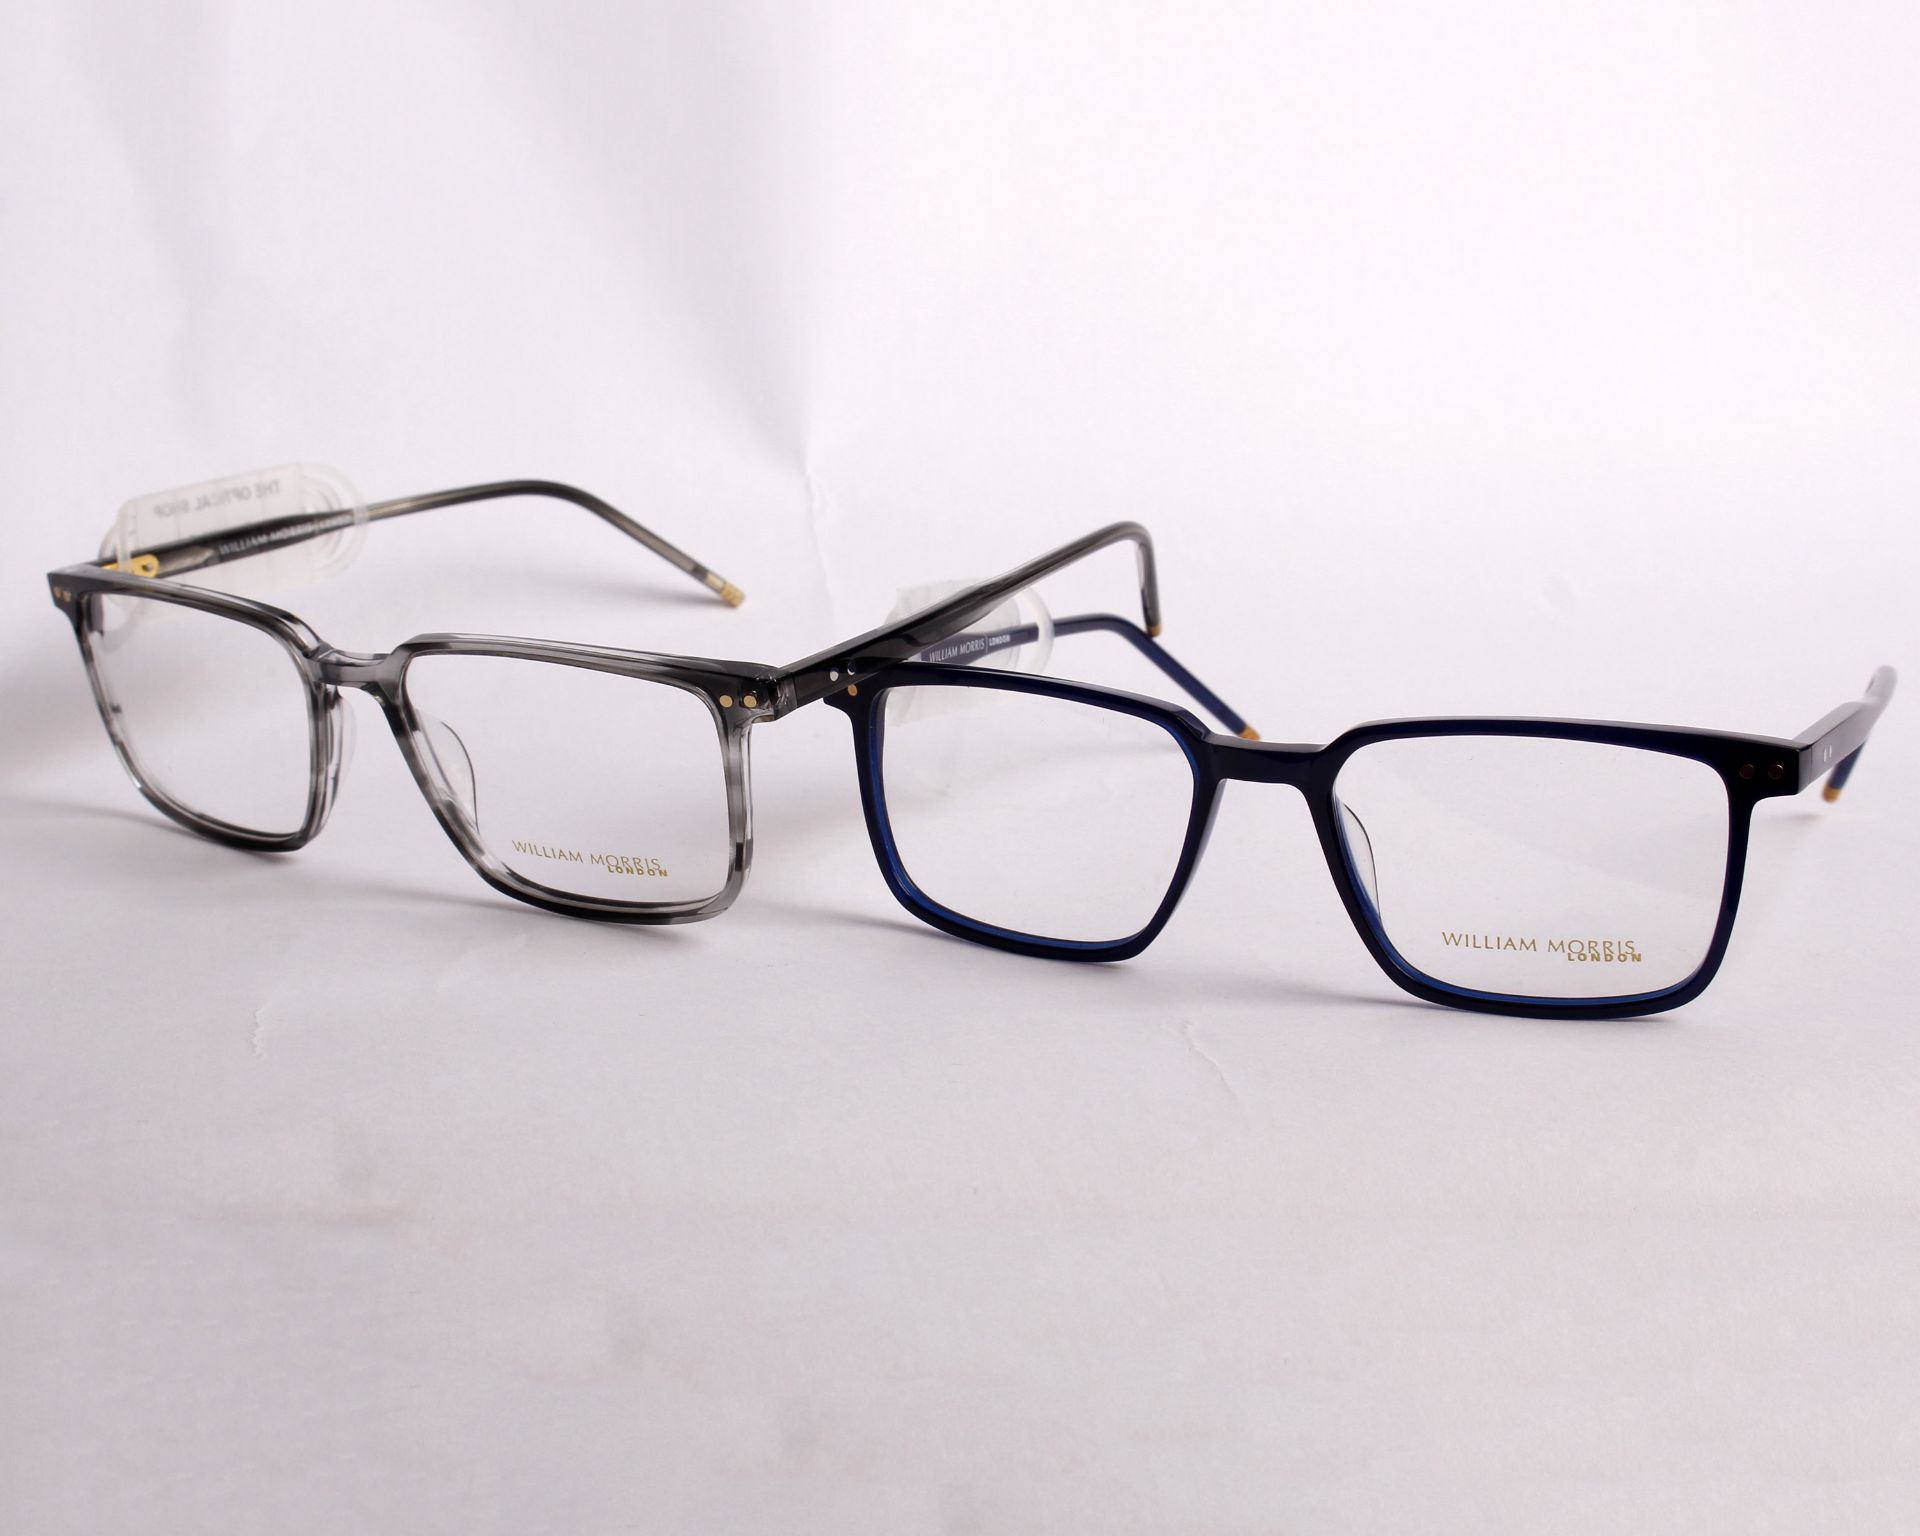 Two pairs of as new William Morris glasses frames with clear glass (RRP £170).